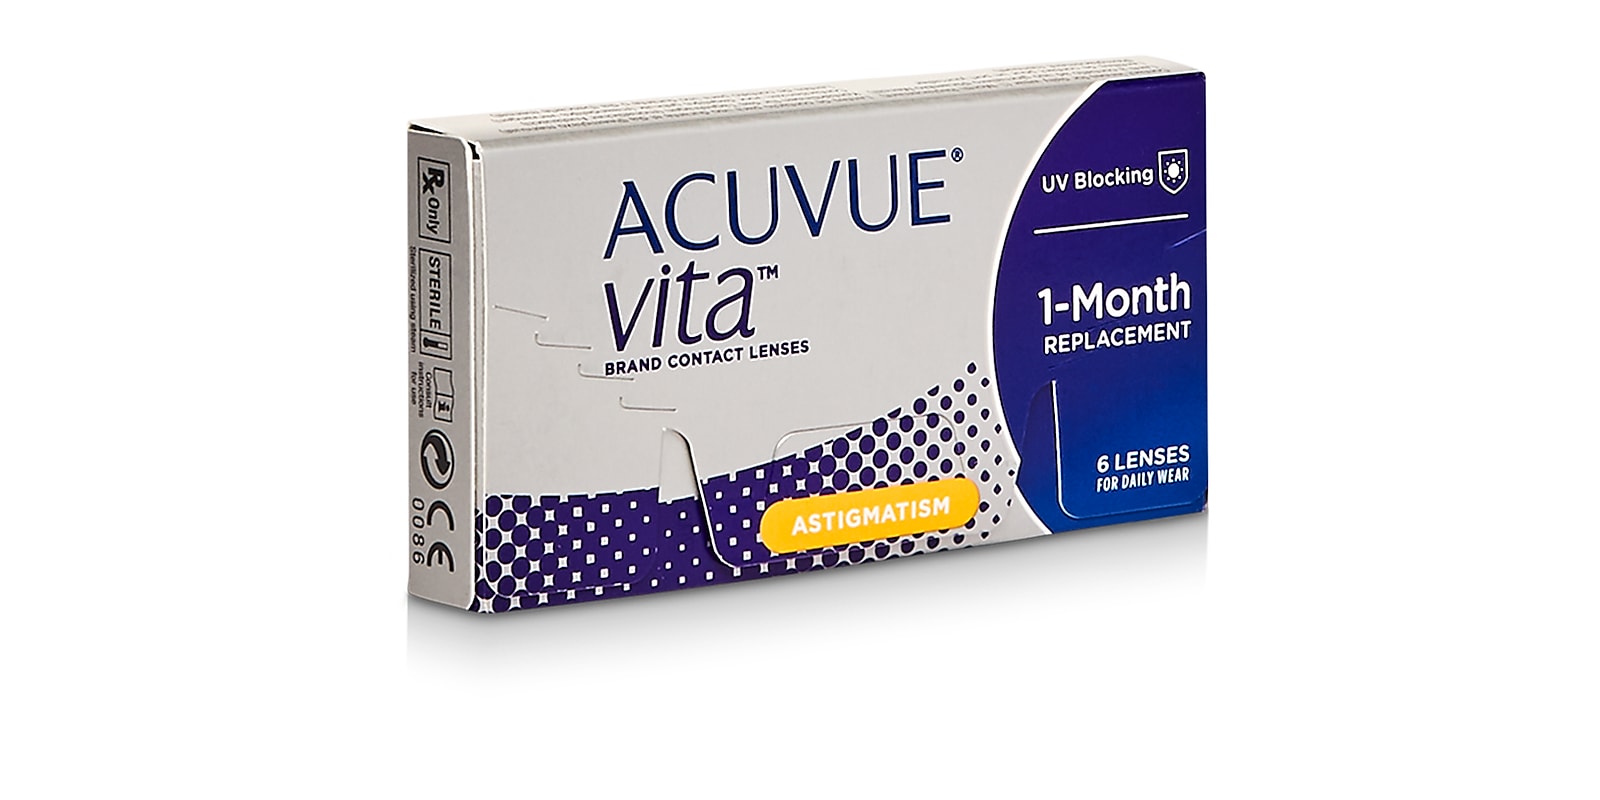 Acuvue® Vita for Astigmatism, 6 pack contact lenses